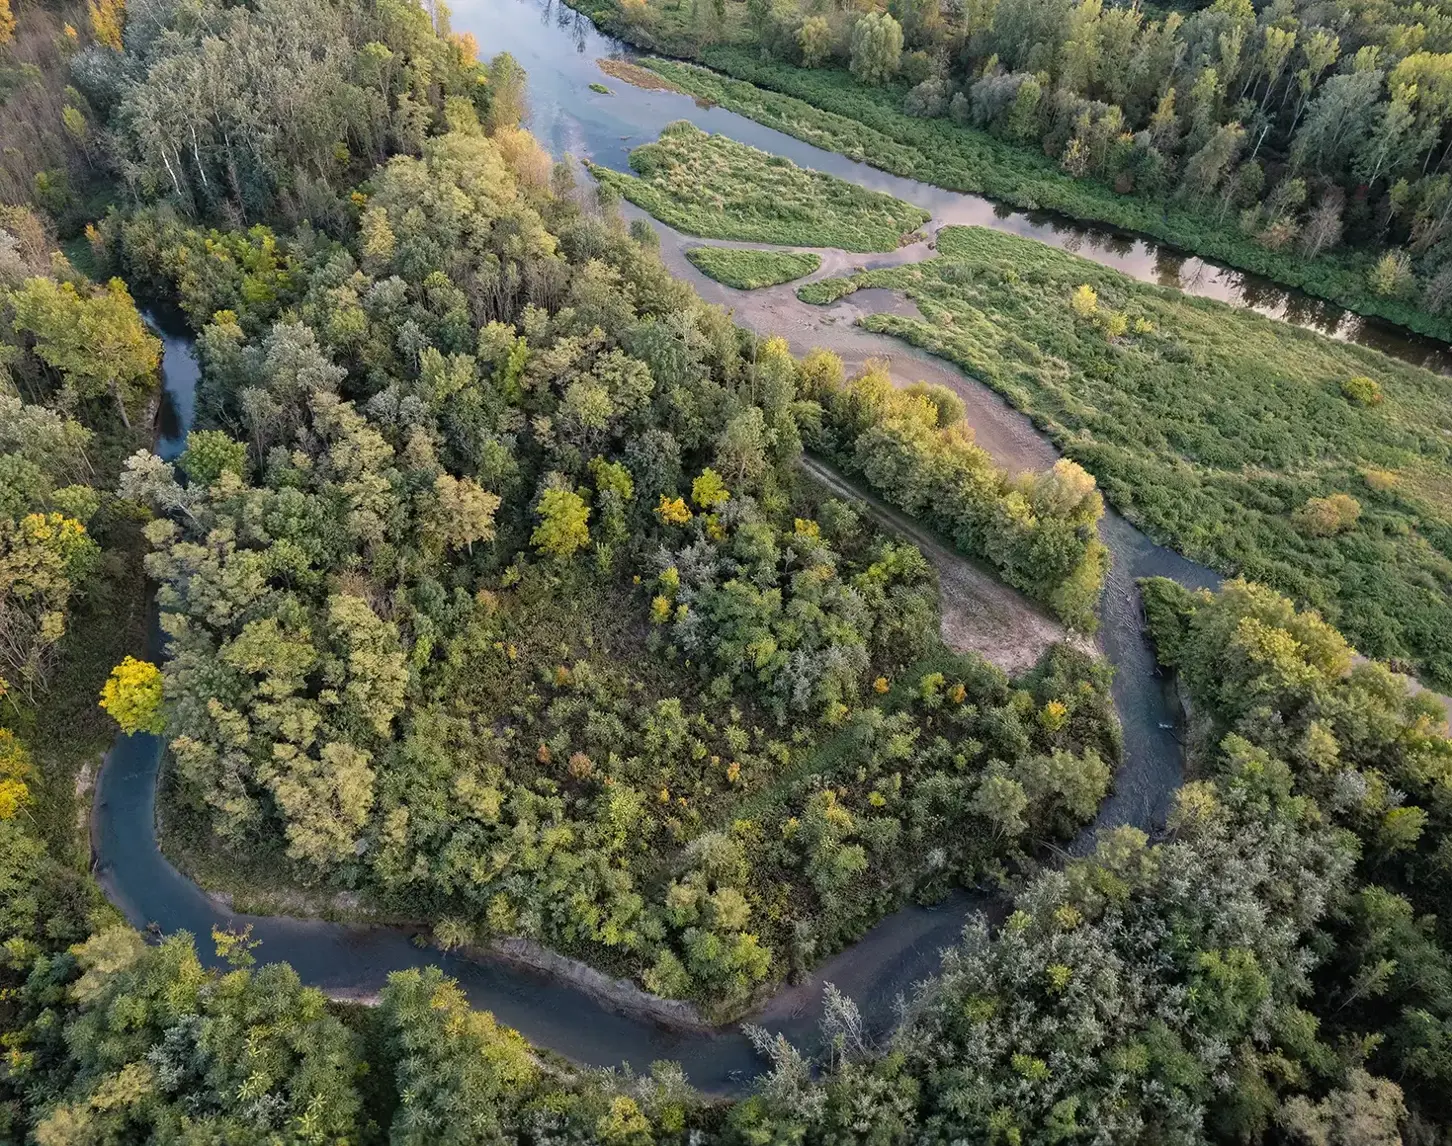 Between 2009 and 2019, a new floodplain landscape was created on the Traisen. The picture shows the renaturalized Traisen from above. You can see not only the river, but also an alluvial forest.